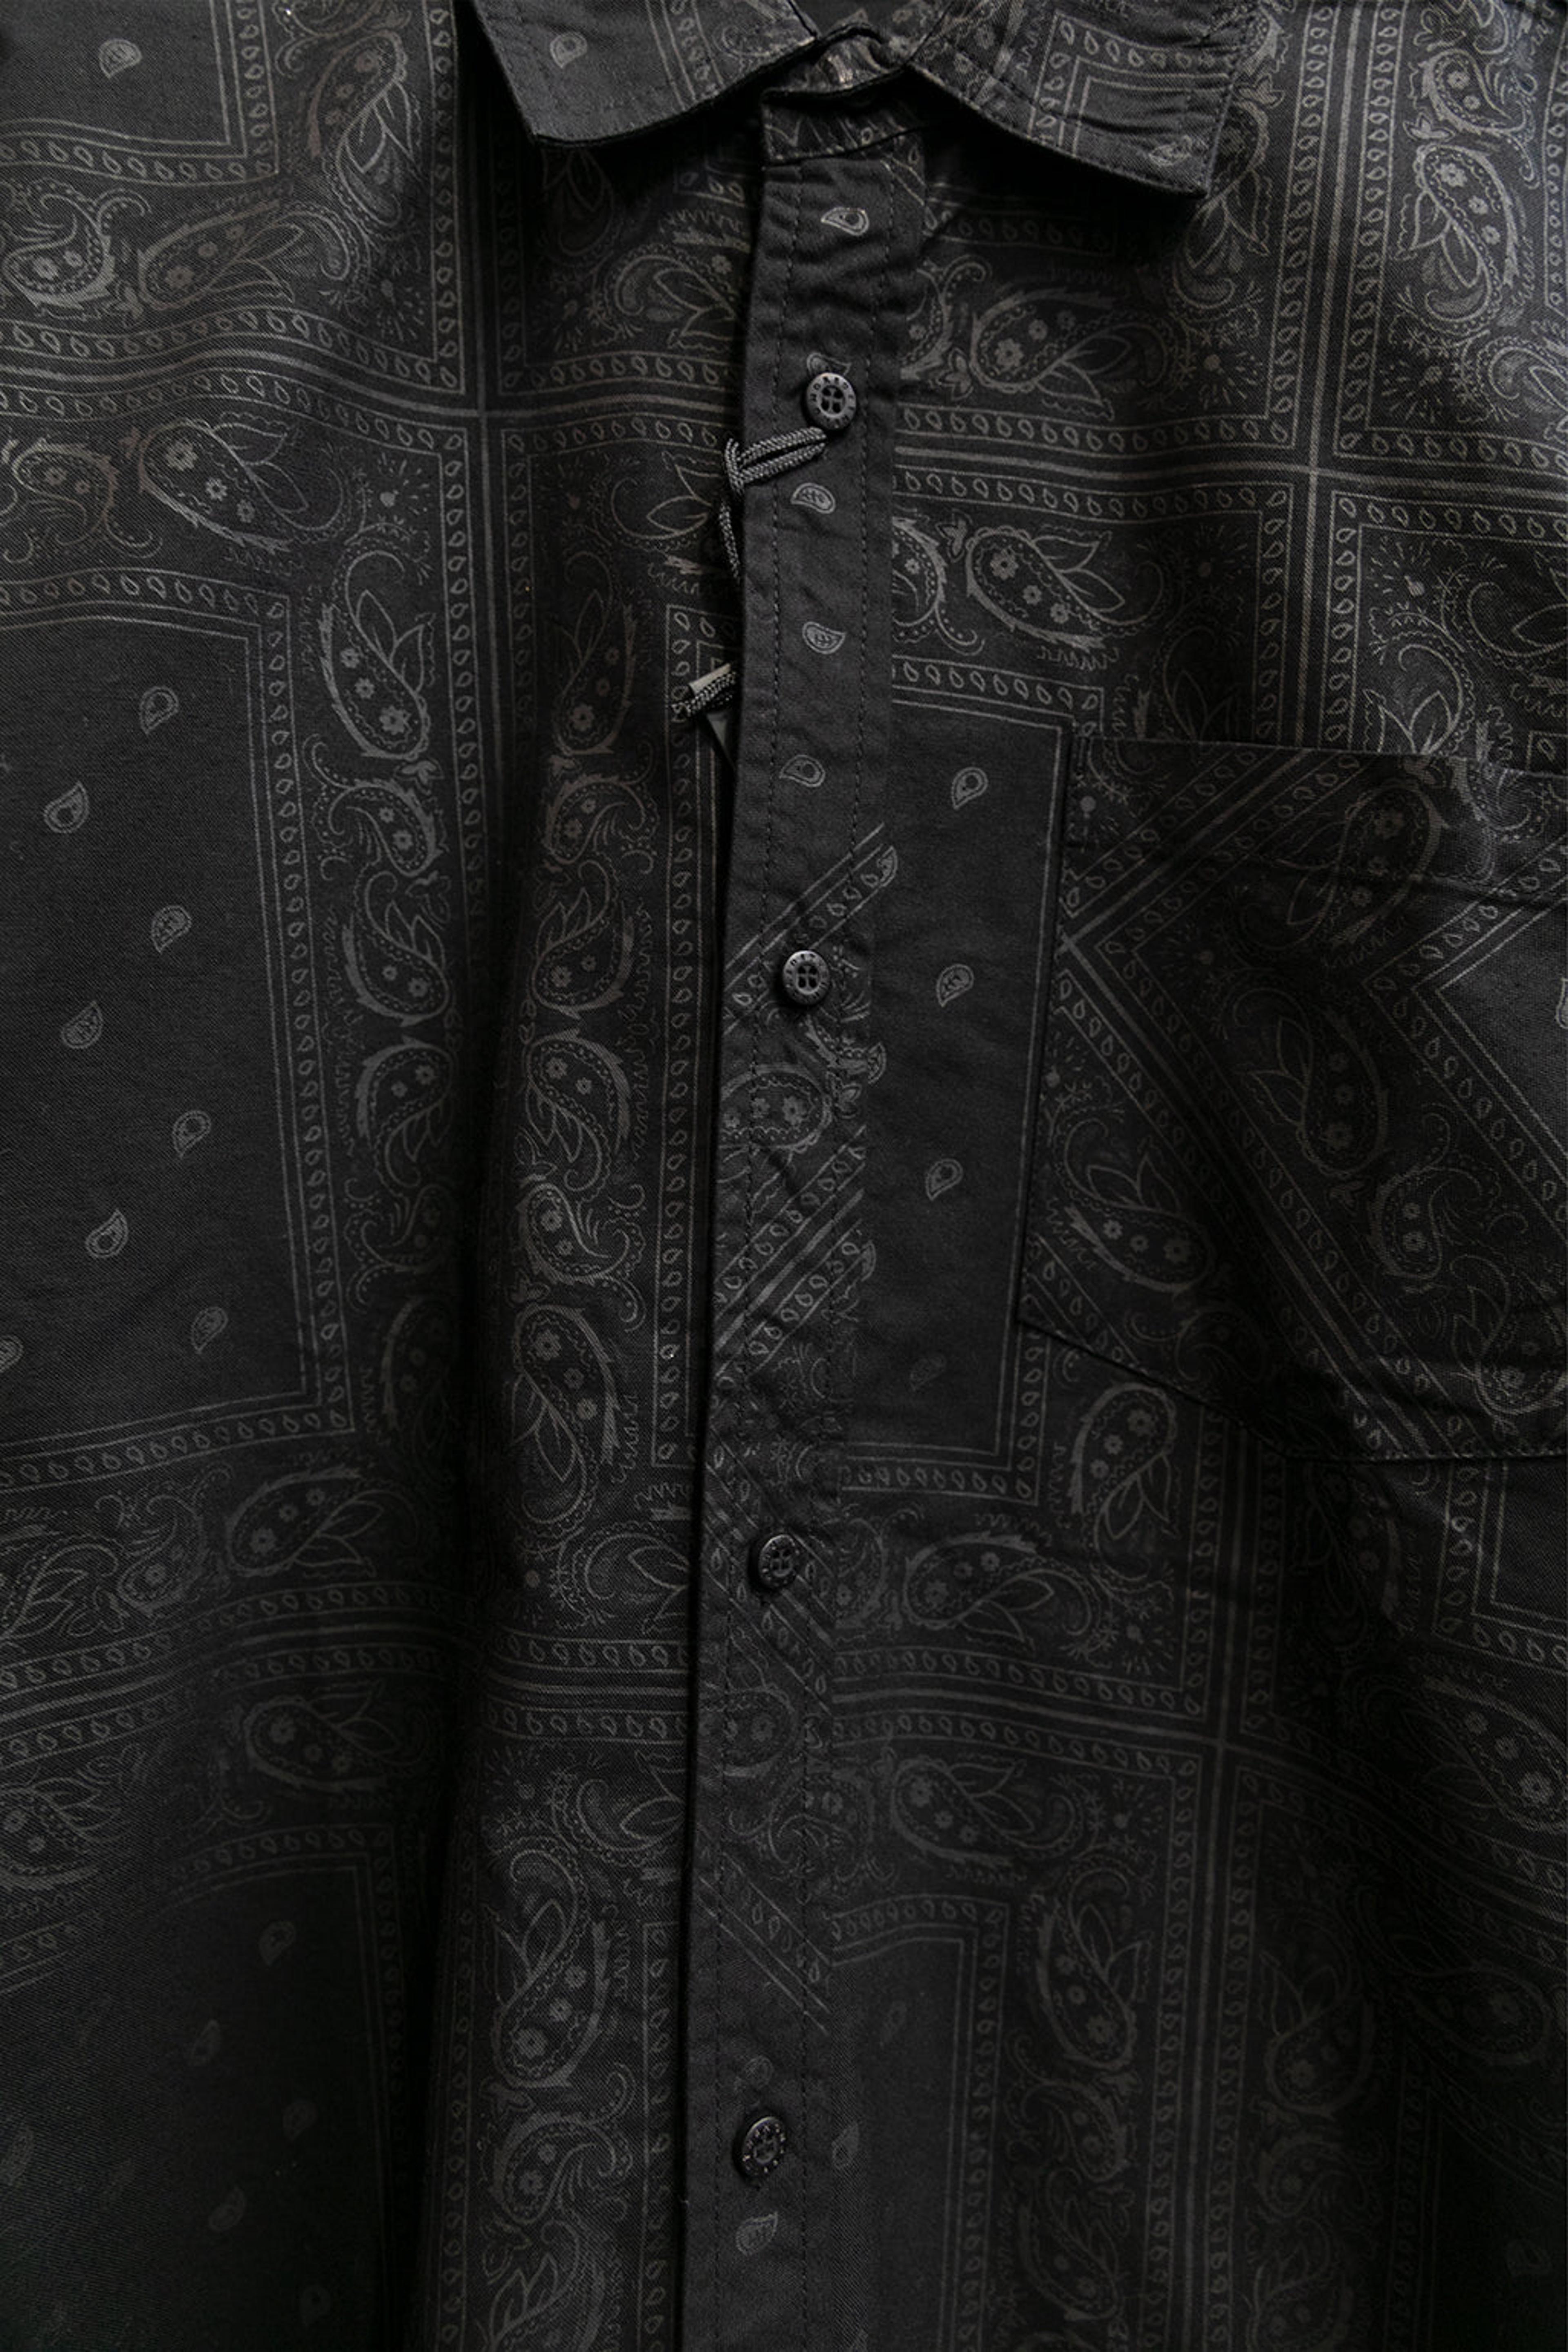 Alternate View 1 of Paisley Button-Up